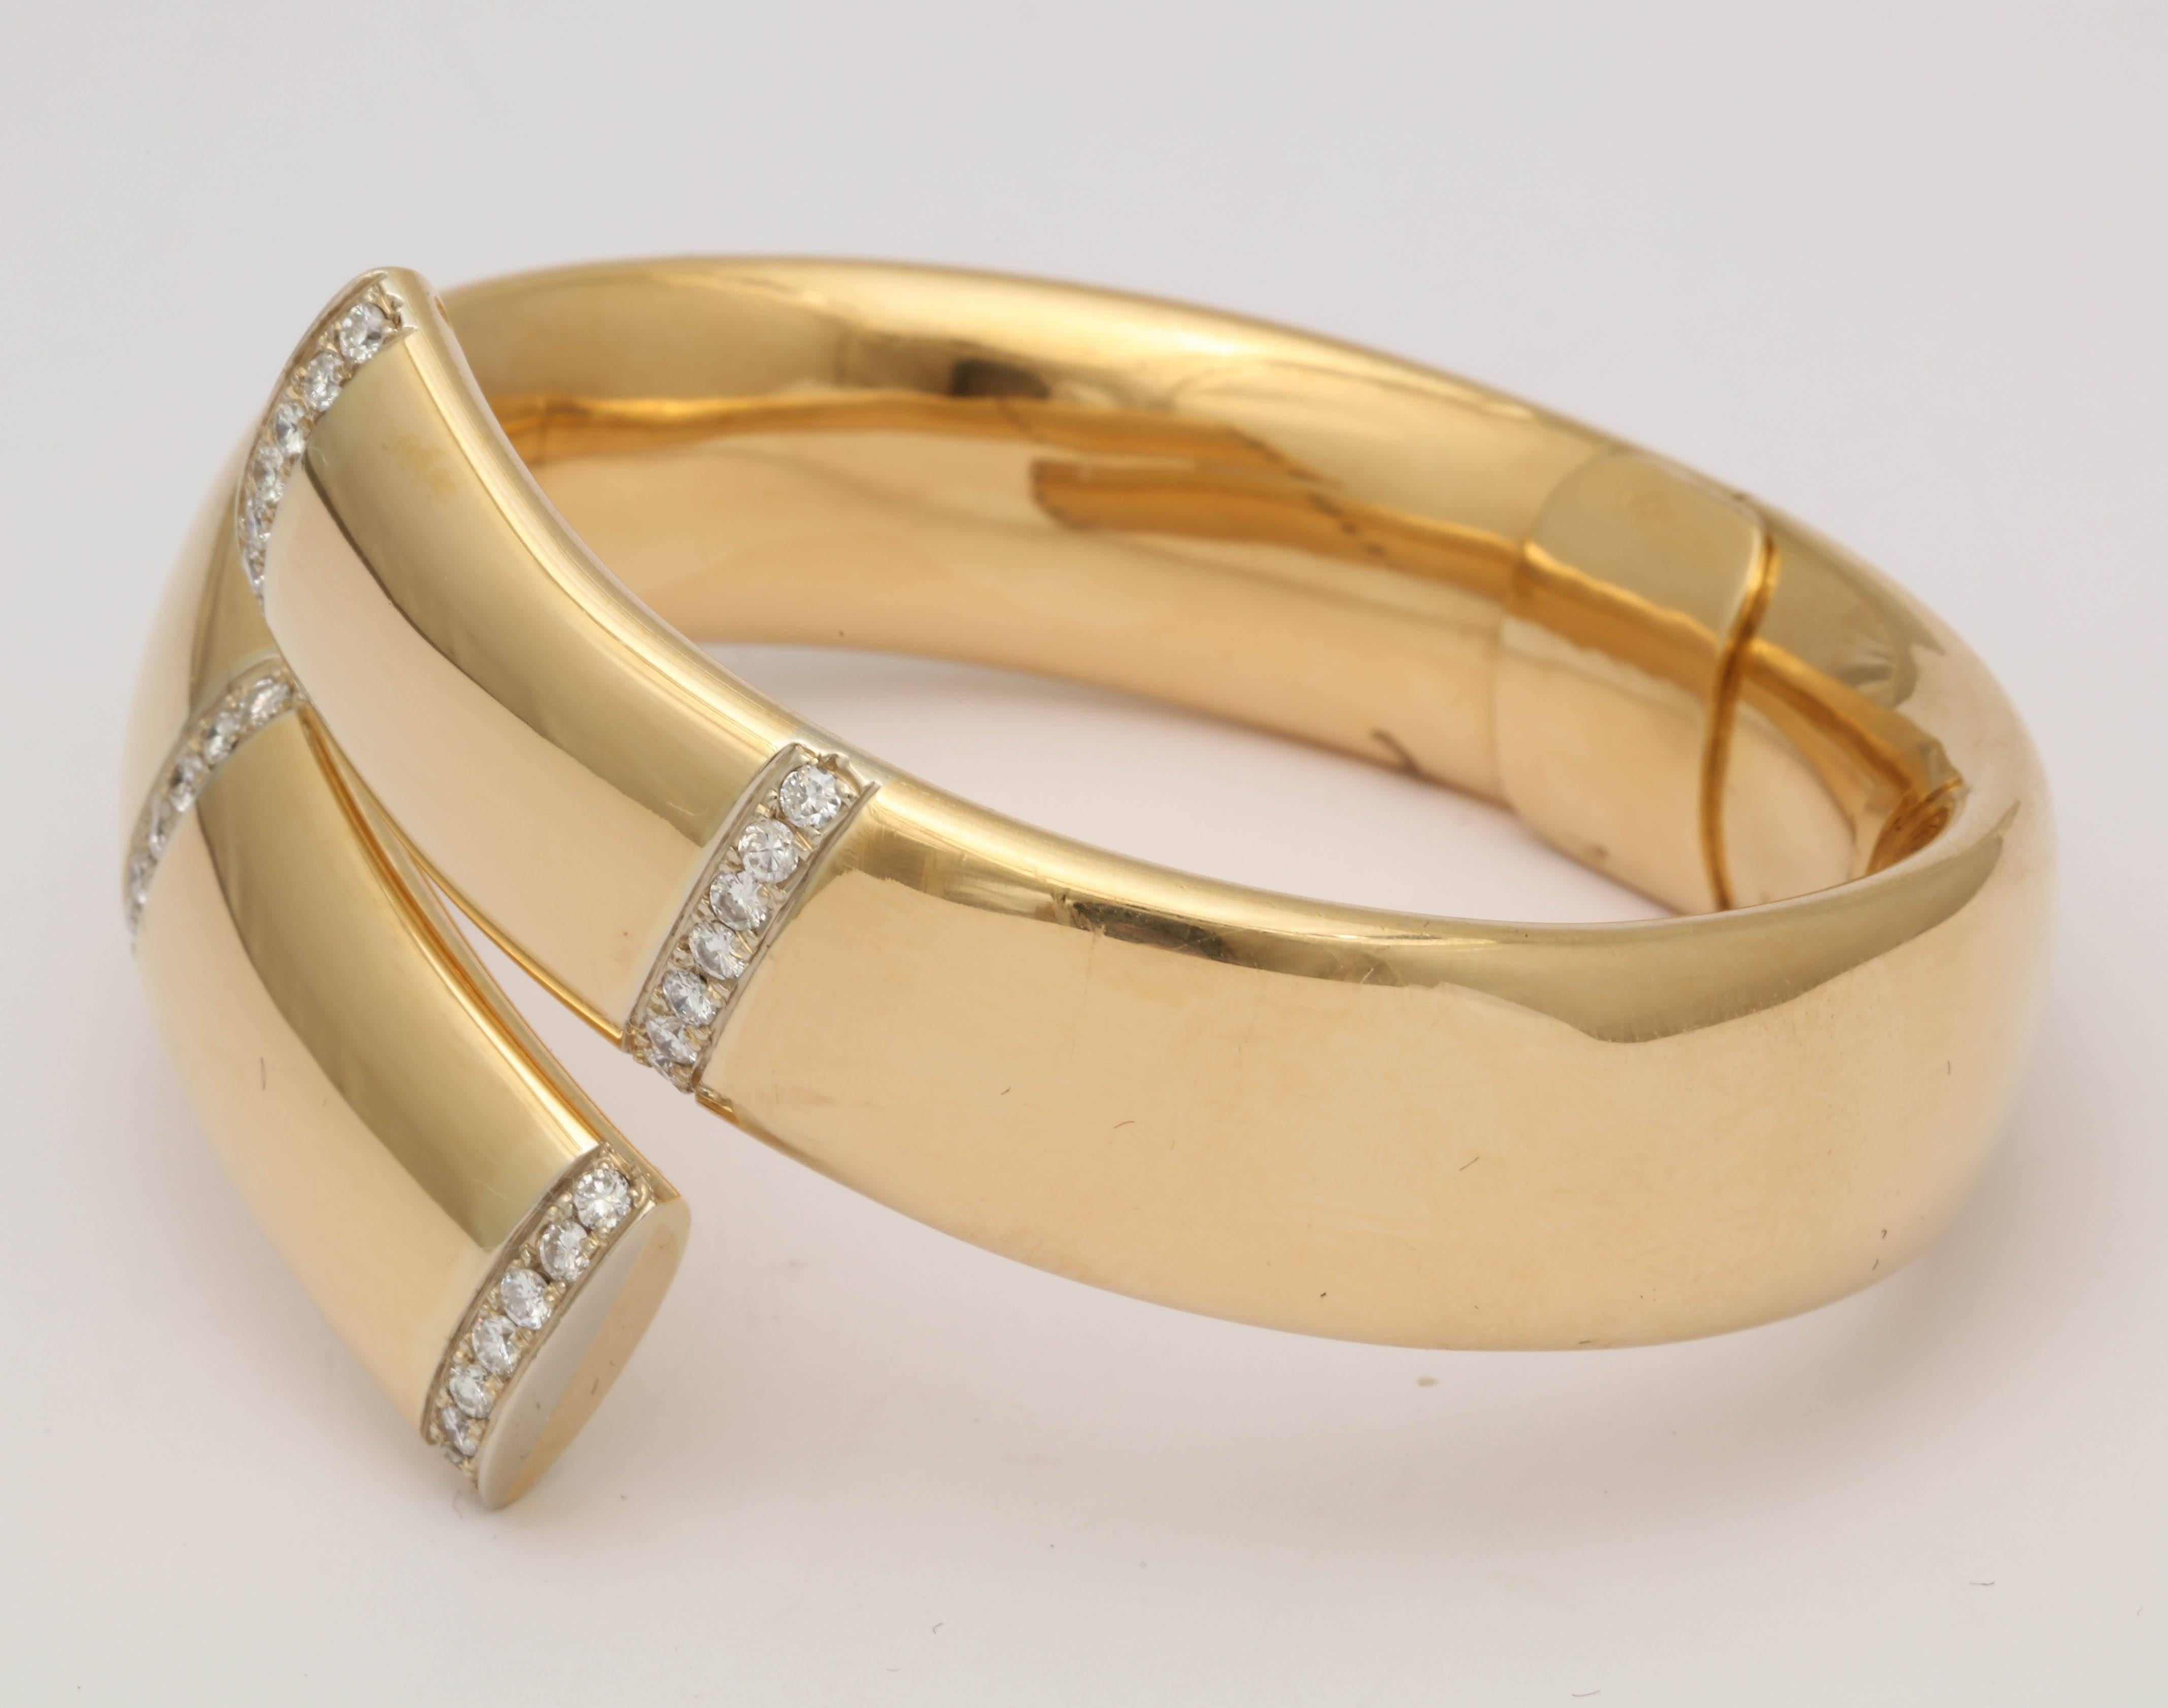 One Ladies 18kt Yellow Gold High Polish Wrap Around Bangle Bracelet Embellished With 32 High Quality Full Cut Diamonds Weighing Approximately 1.50 Carats Total Weight. Beautiful Open Hinged Mechnanism For Easy wear And Very Smooth Finish For A